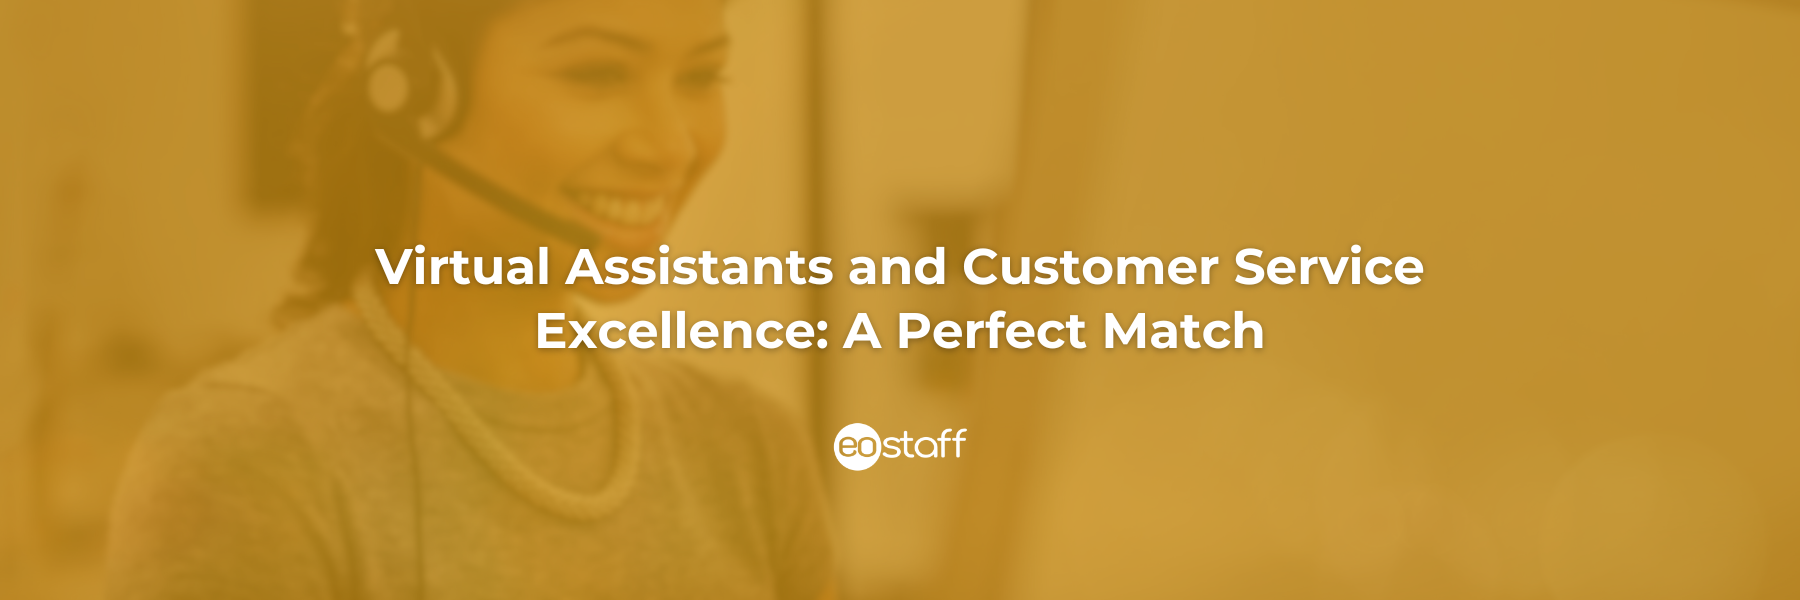 Virtual Assistants and Customer Service Excellence_ A Perfect Match